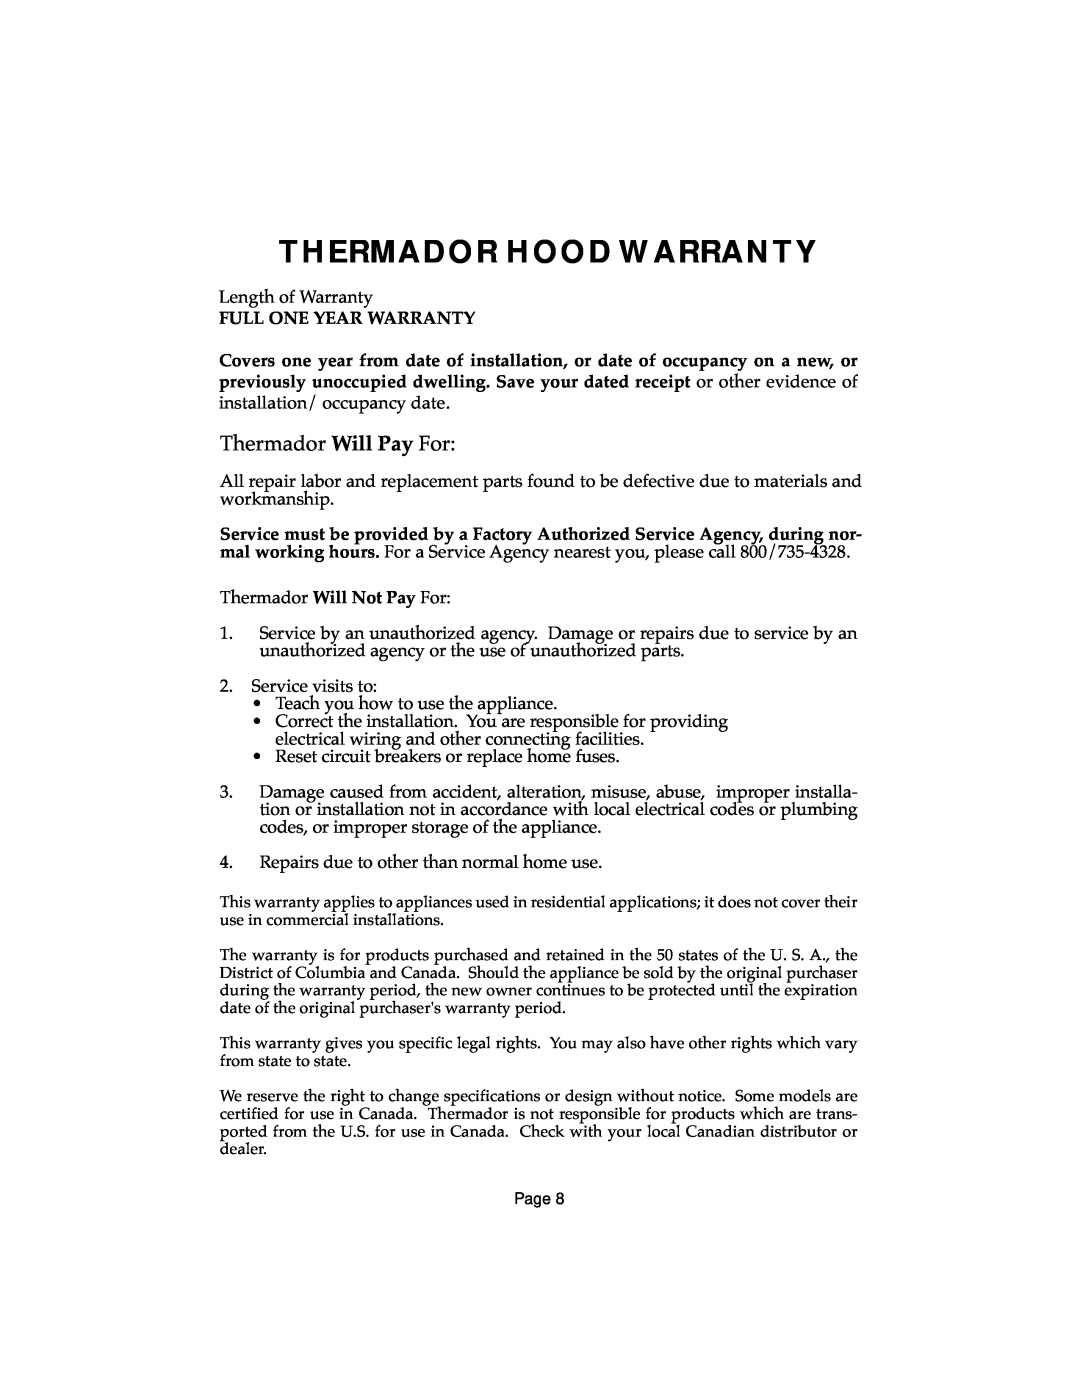 Thermador HTSW, HCSW, HDW, HGSW, HSW installation instructions Thermador Hood Warranty, Thermador Will Pay For 